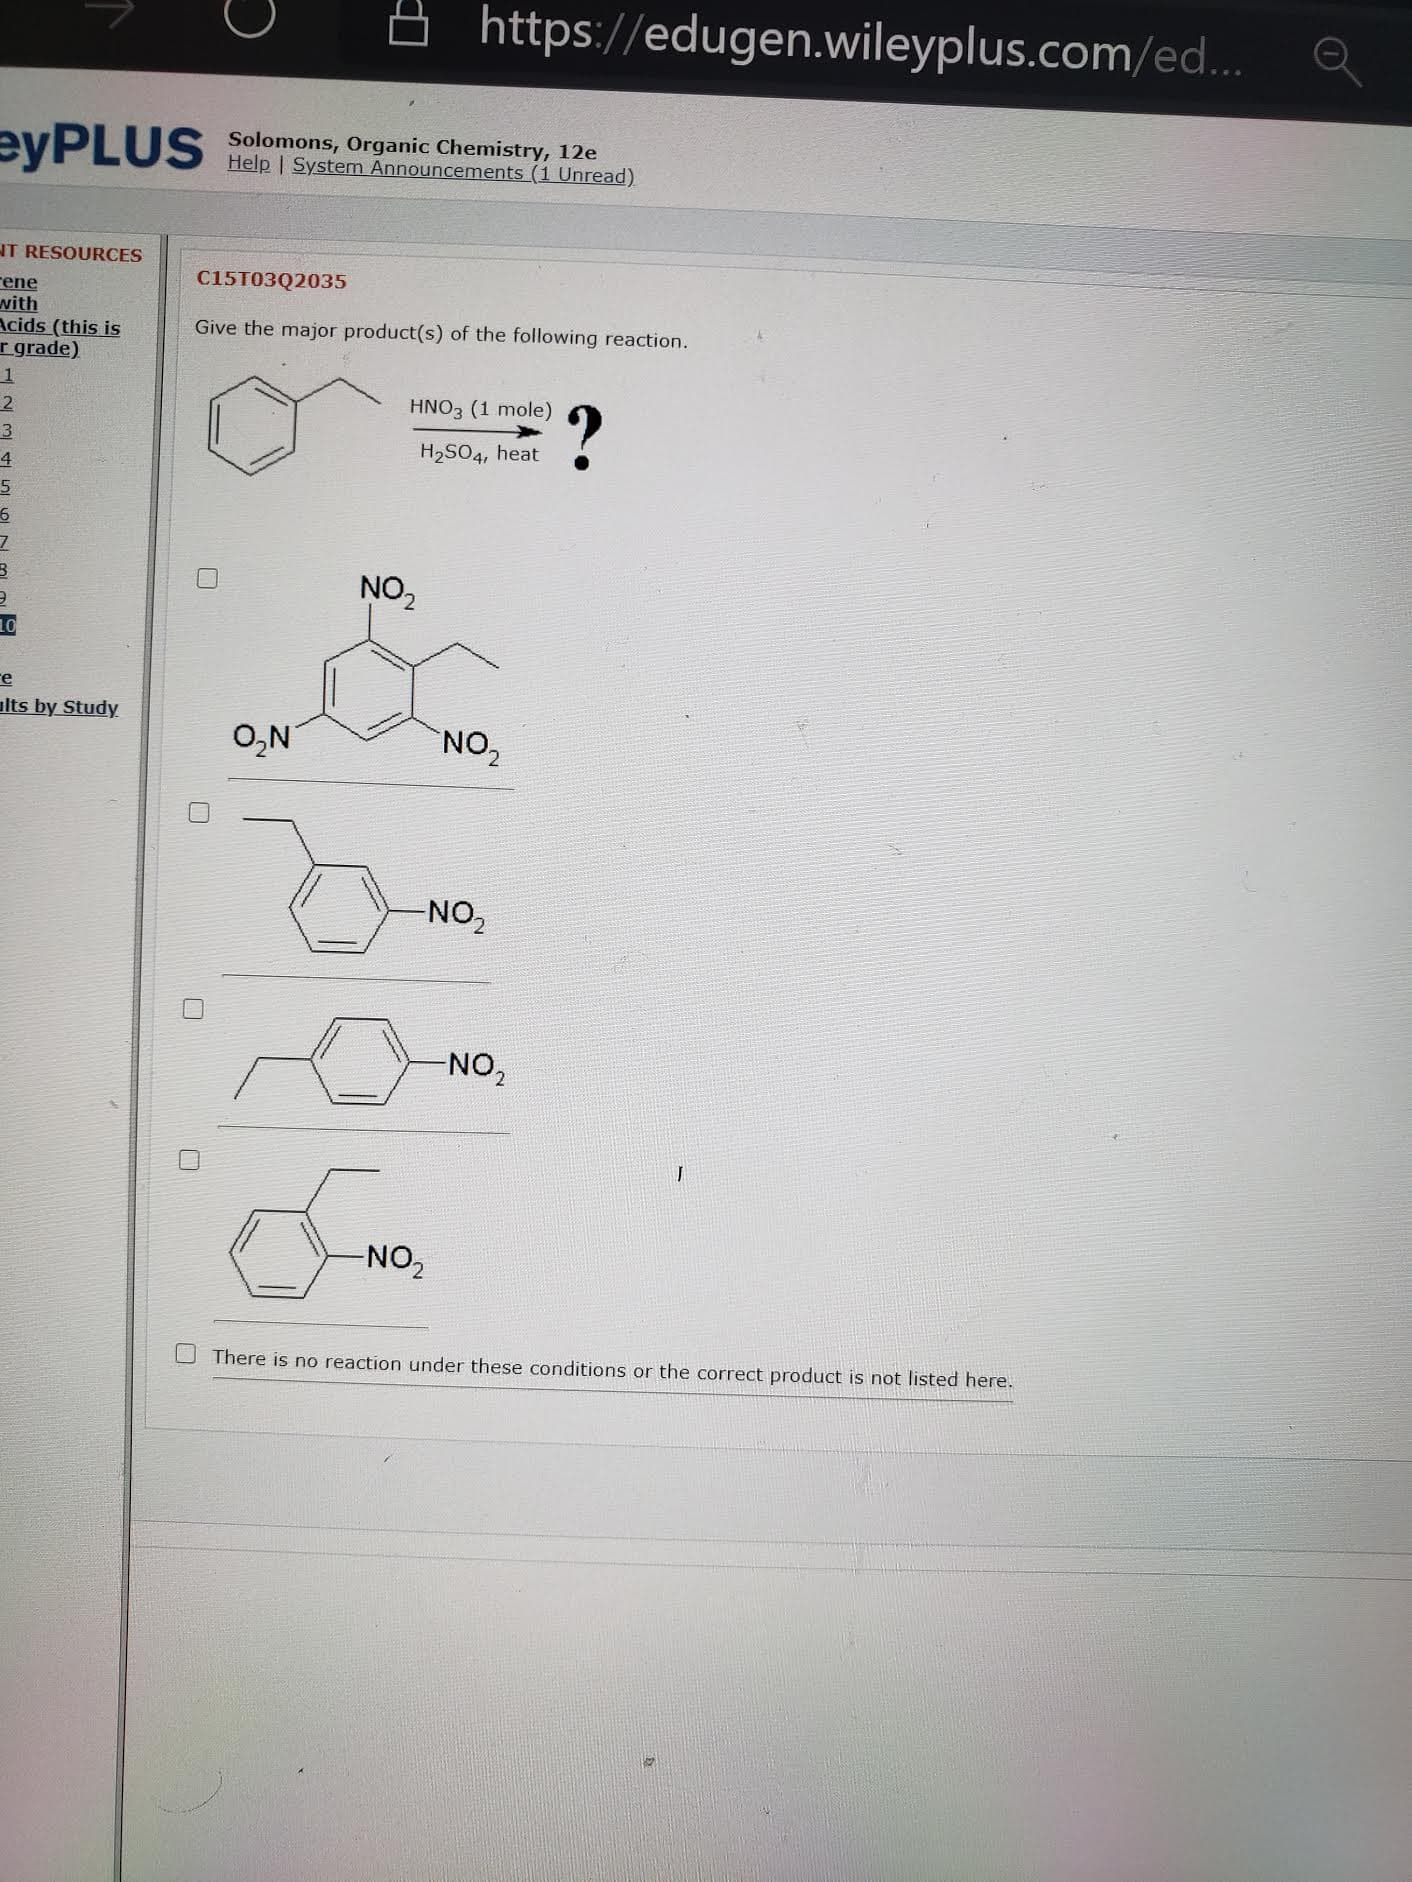 C15T03Q2035
Give the major product(s) of the following reaction.
HNO3 (1 mole)
?
H2SO4, heat
NO,
O,N
NO,
-NO,
NO,
NO,
O There is no reaction under these conditions or the correct product is not listed here.
